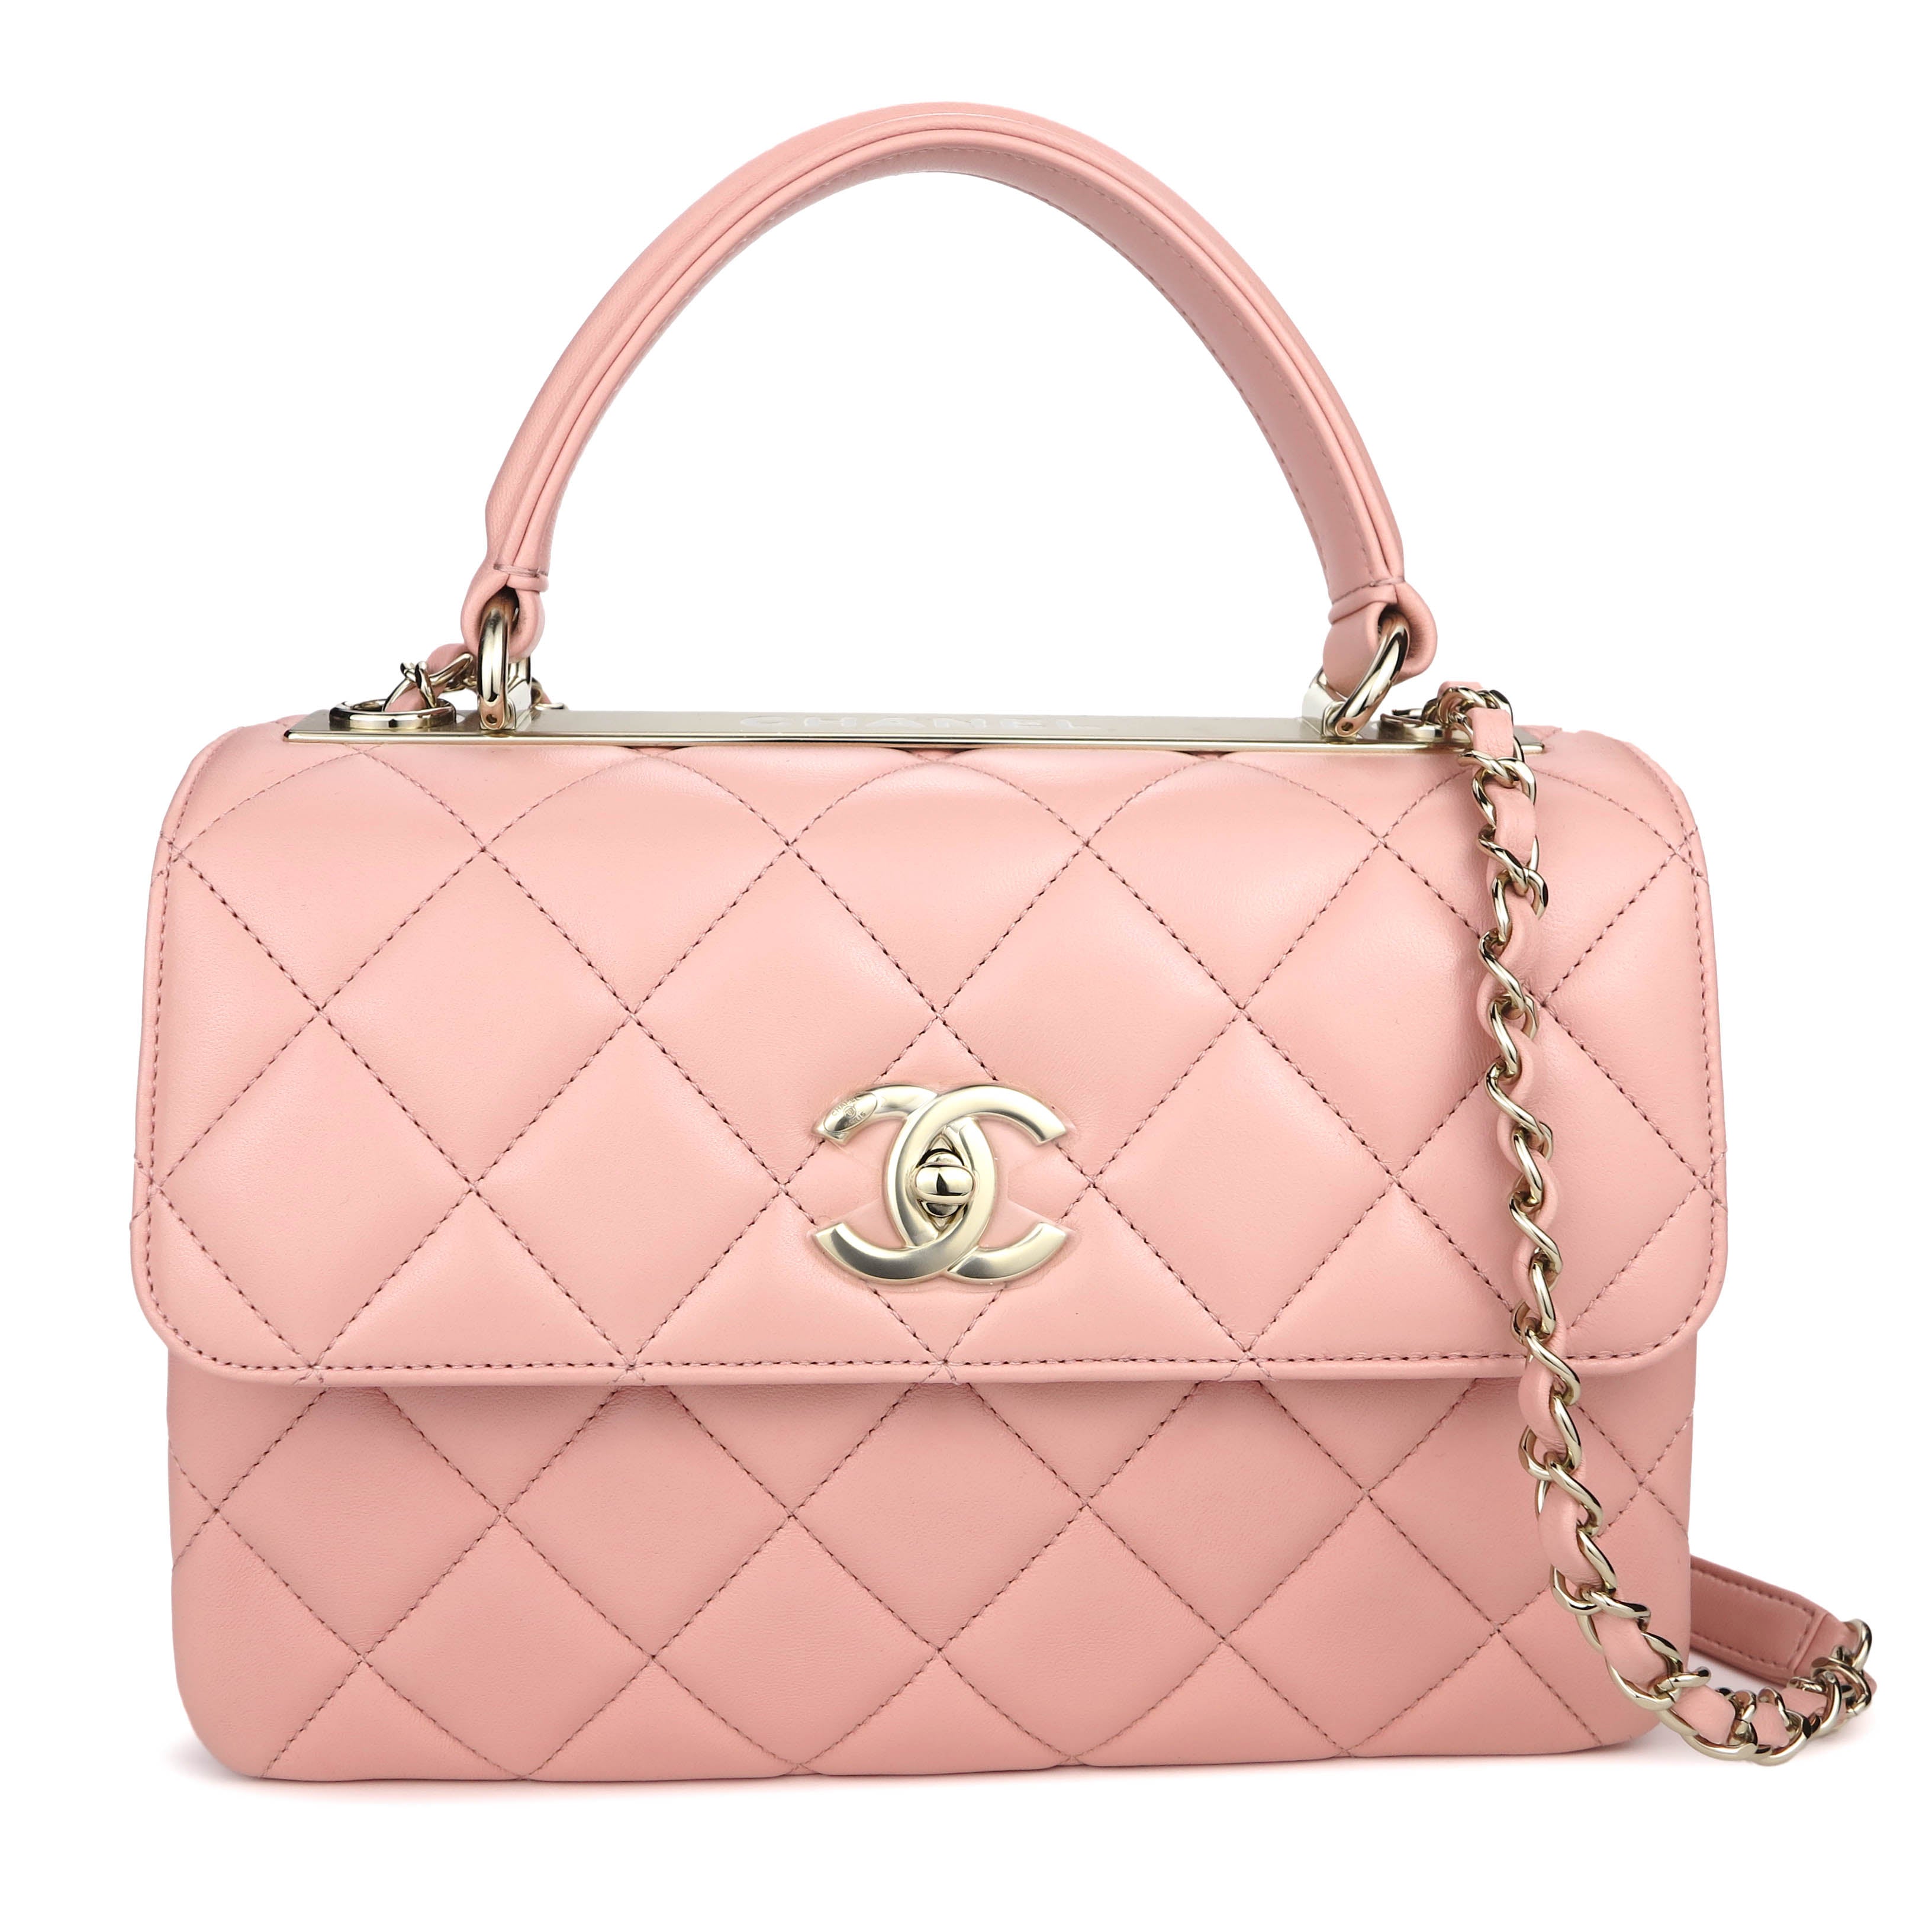 CHANEL Lambskin Quilted Small Trendy CC Flap Dual Handle Bag Coral 593920